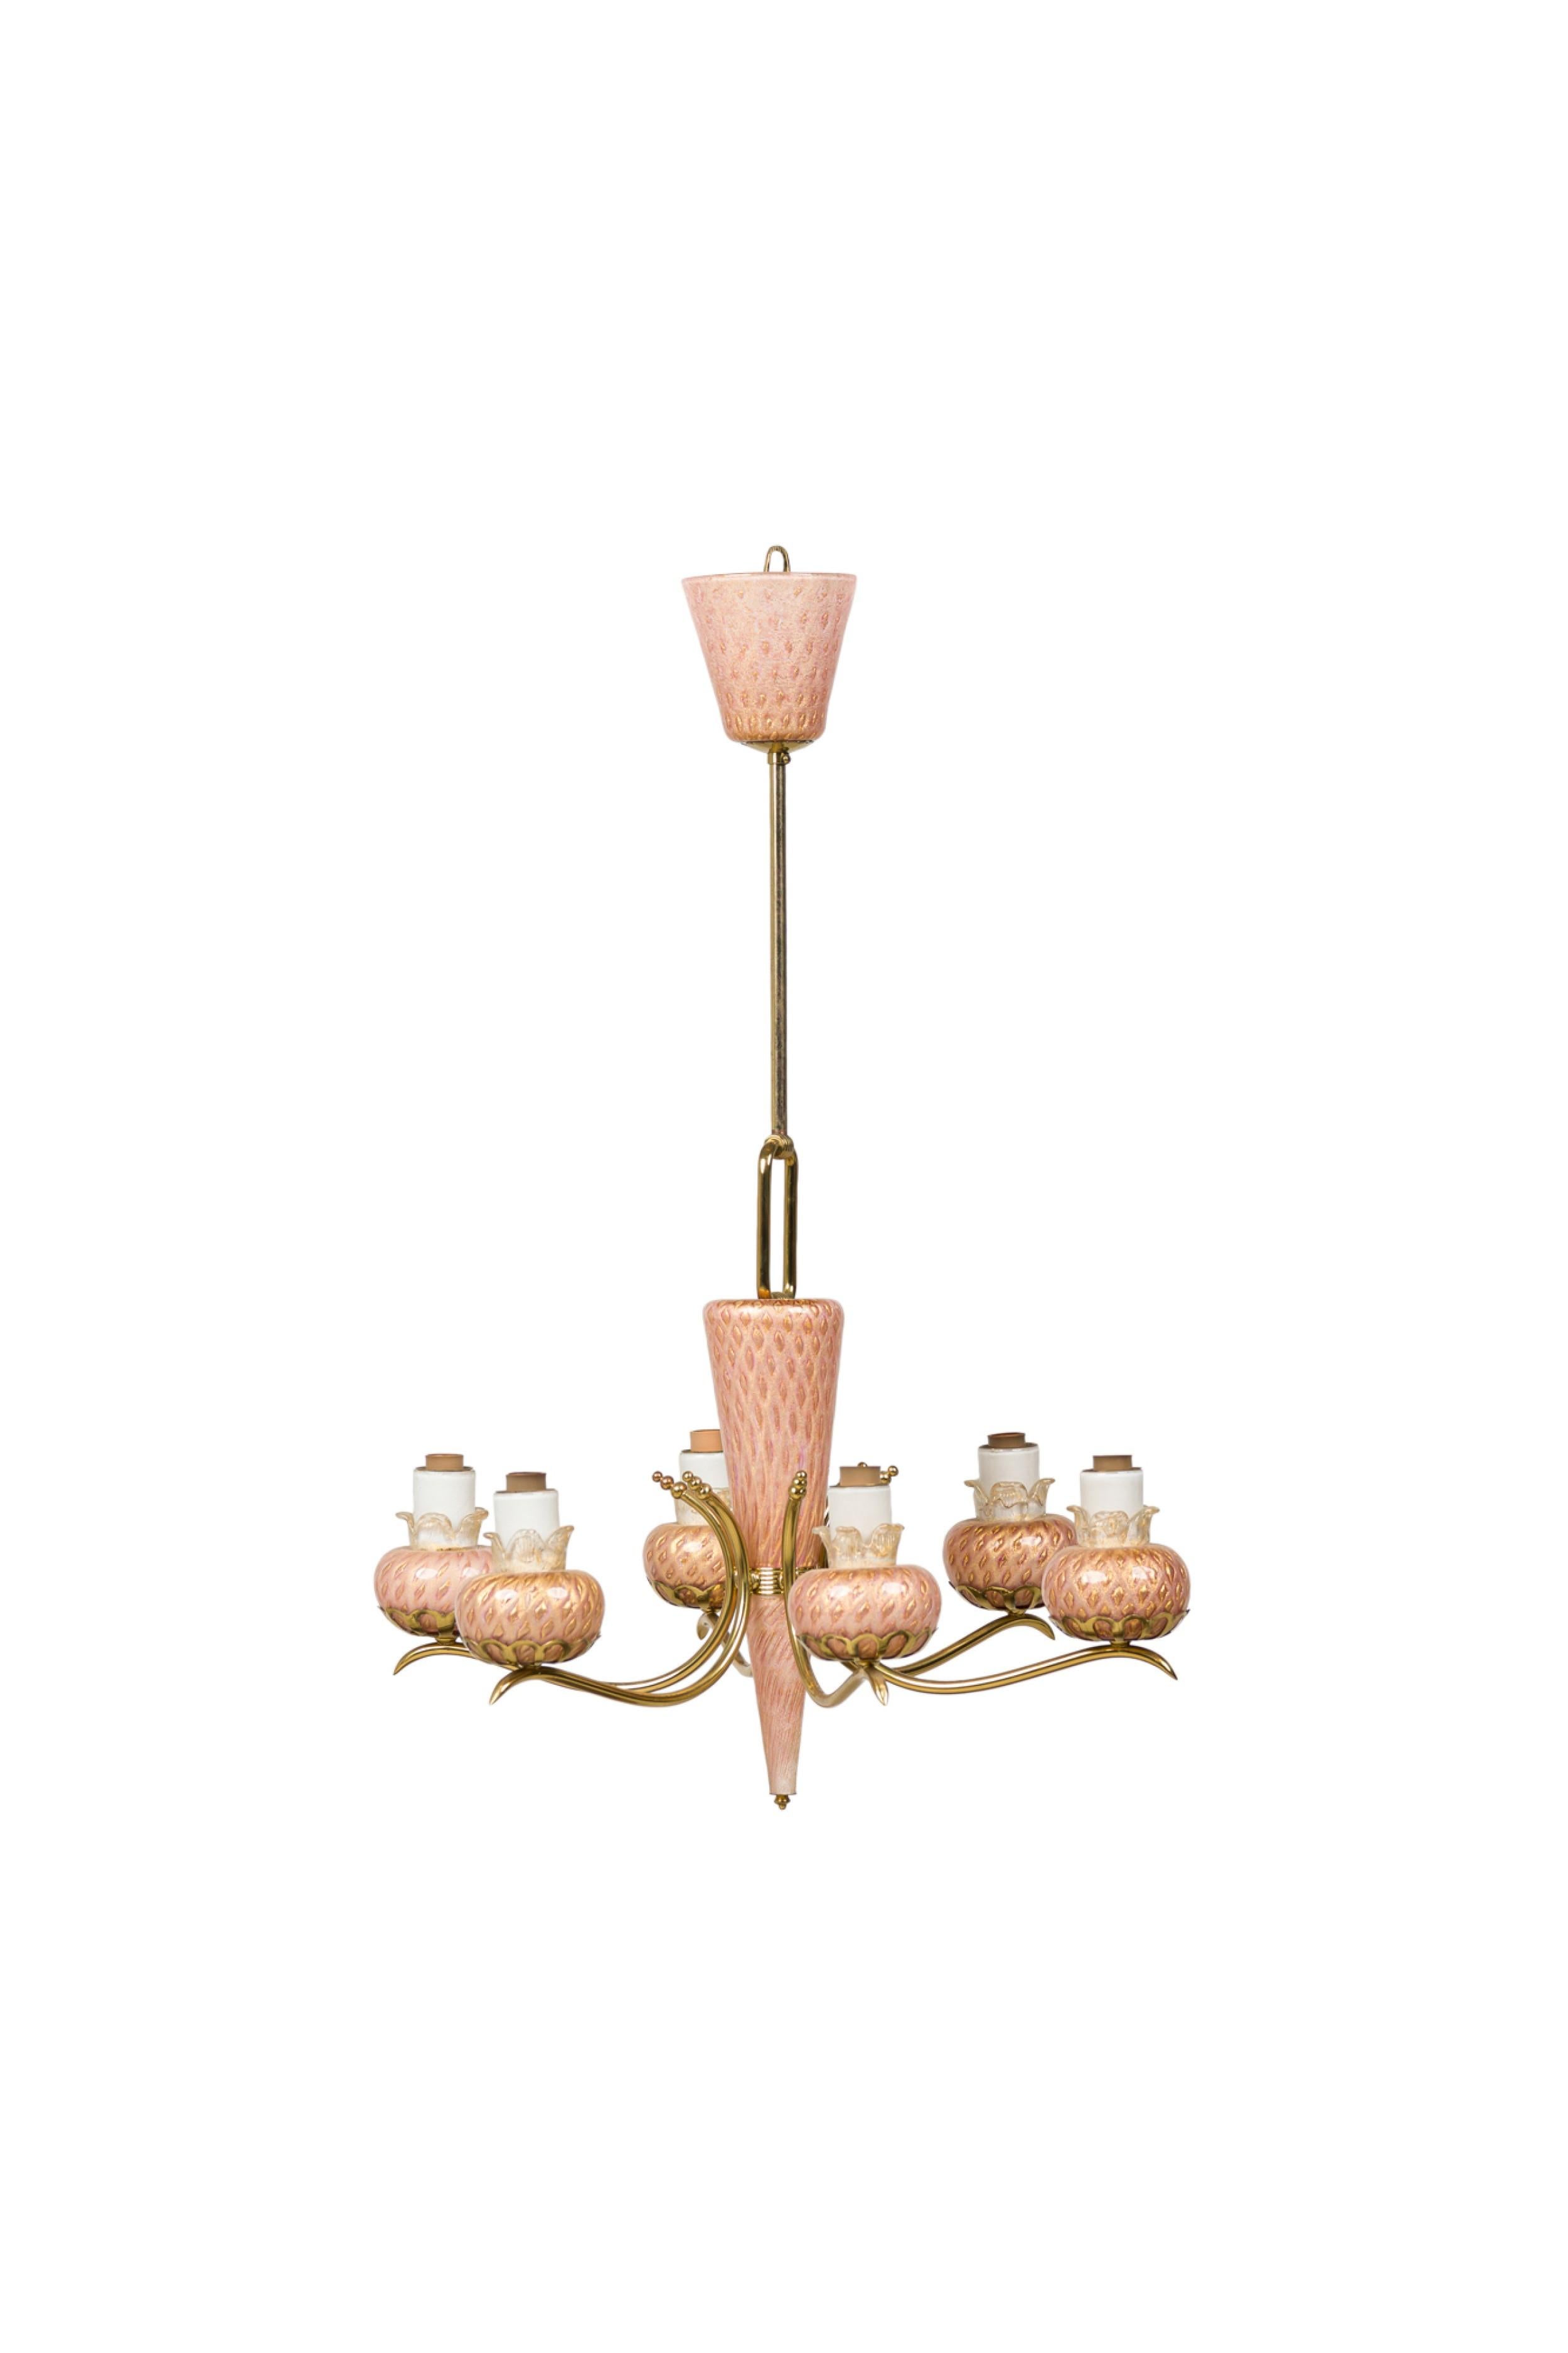 Mid-Century Italian brass chandelier featuring a pink glass upturned cup finial with a gold flecked diamond pattern, downturned conical base and 6 scroll arms with blossom-form lamp holders. (MURANO)
 

 Needs rewiring
